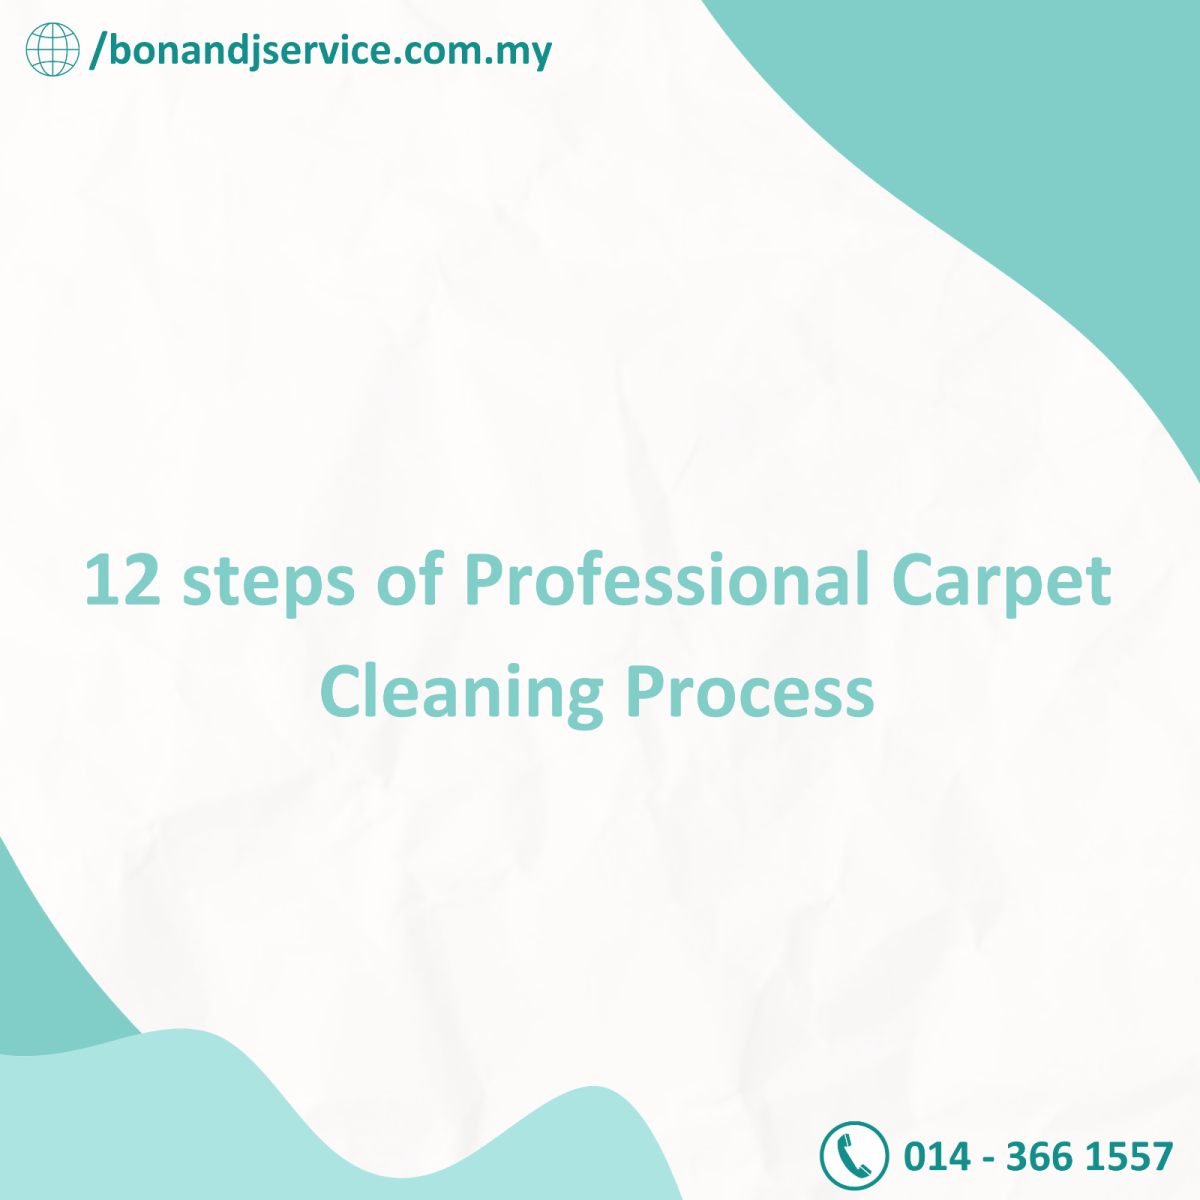 12 Steps of Professional Carpet Cleaning Process